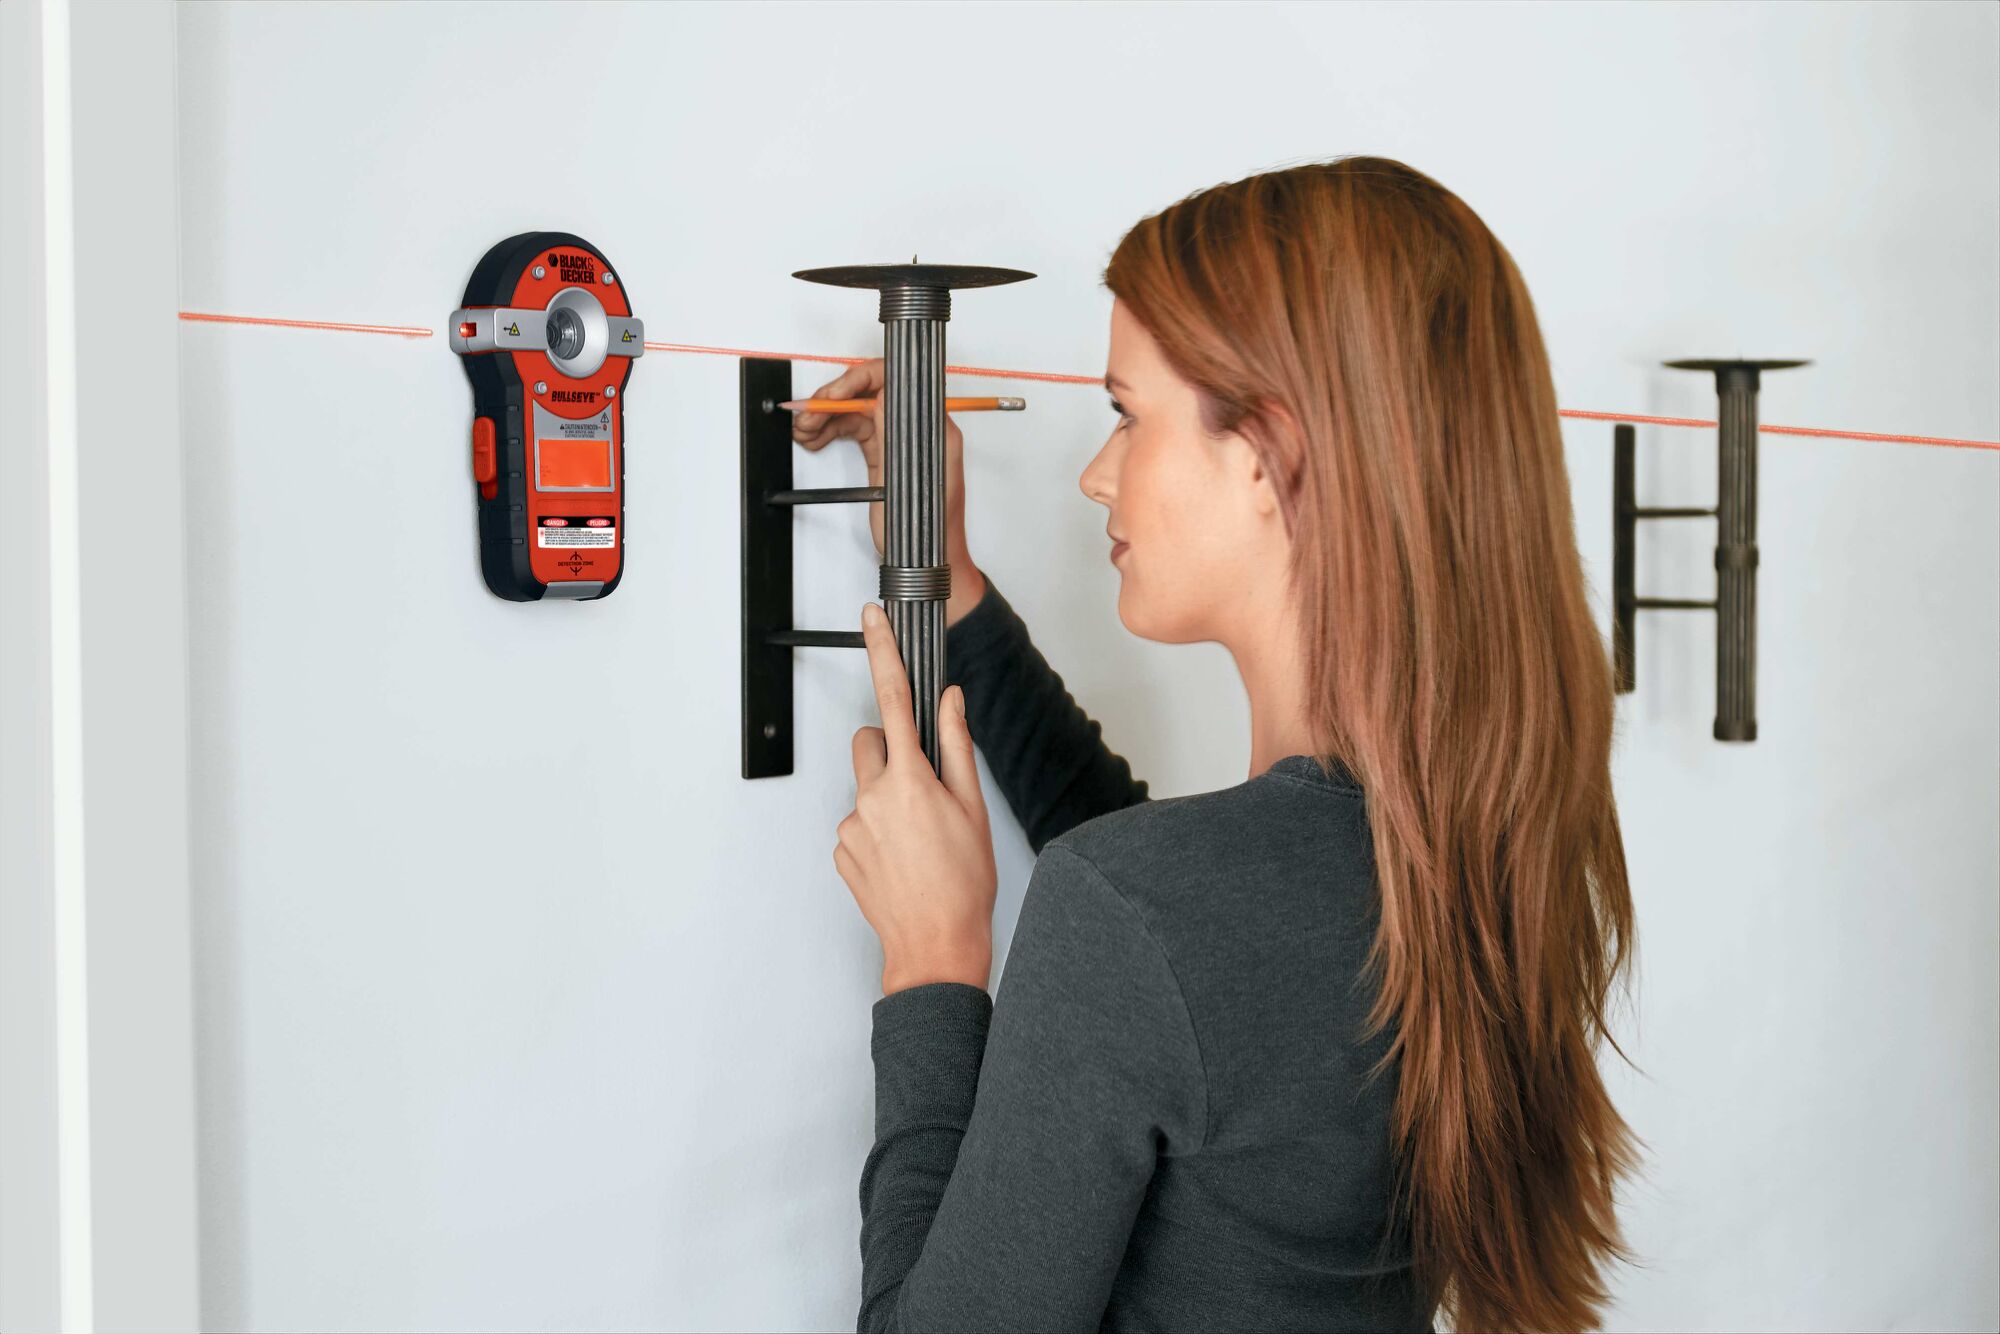 BullsEye Auto Leveling Laser with Stud Sensor being used by person to hang decorative items on wall.